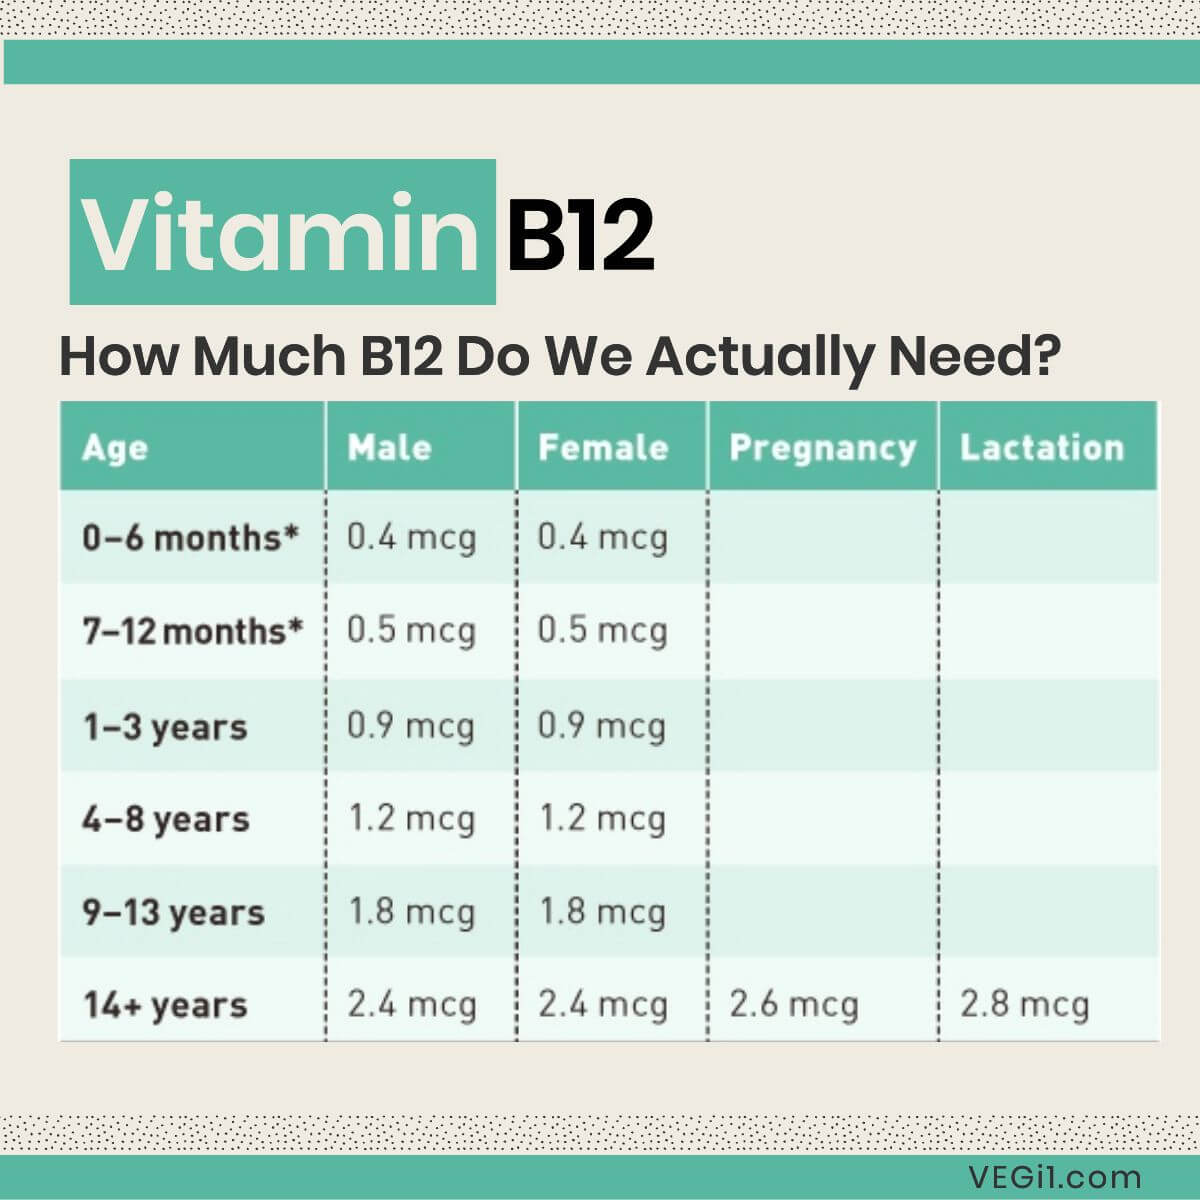 How Much B12 Do We Actually Need?